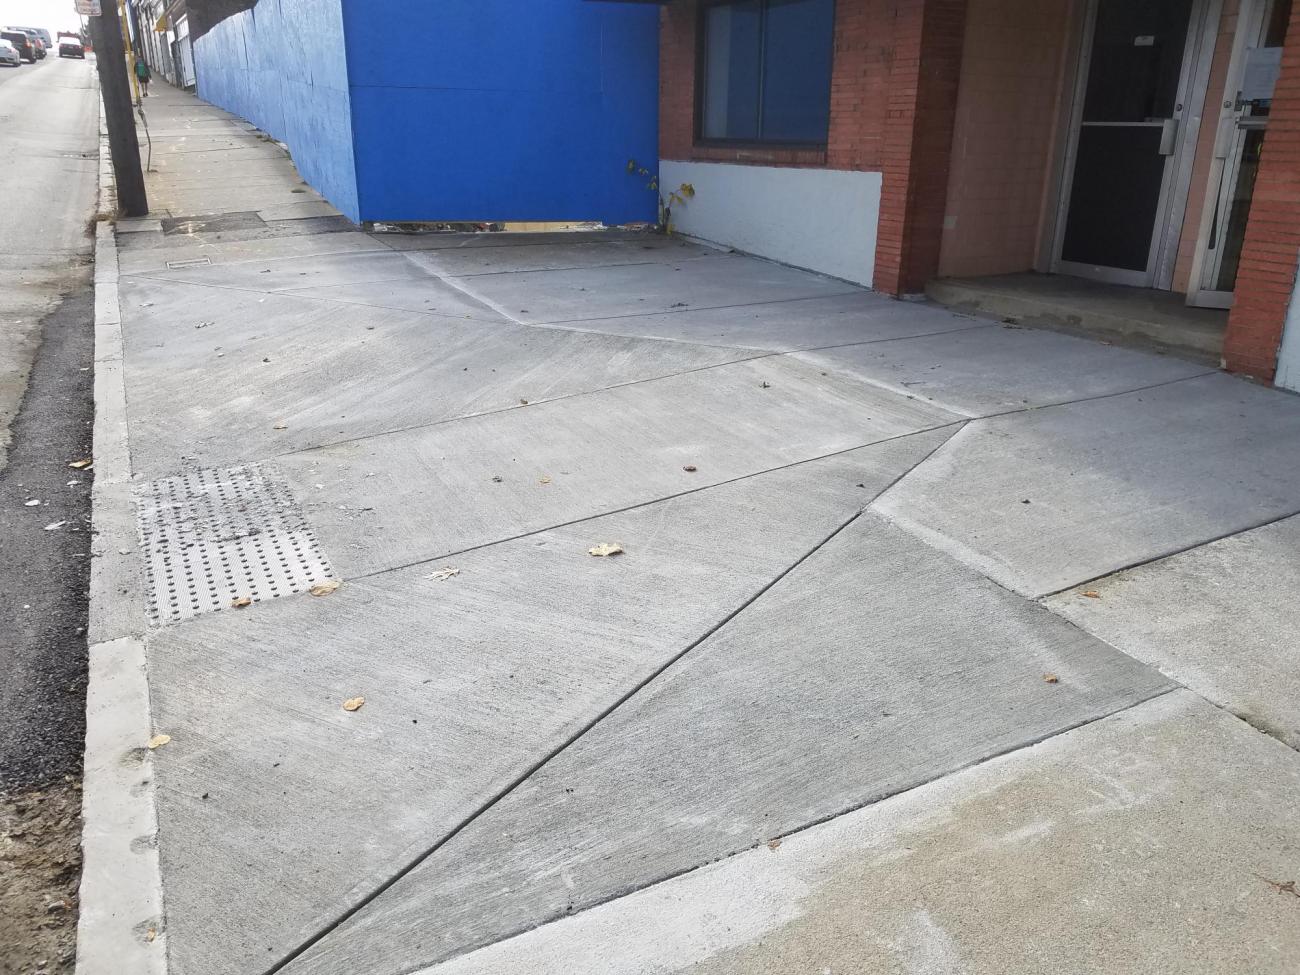 The new accessible ramp on Newport Ave (October 2019)